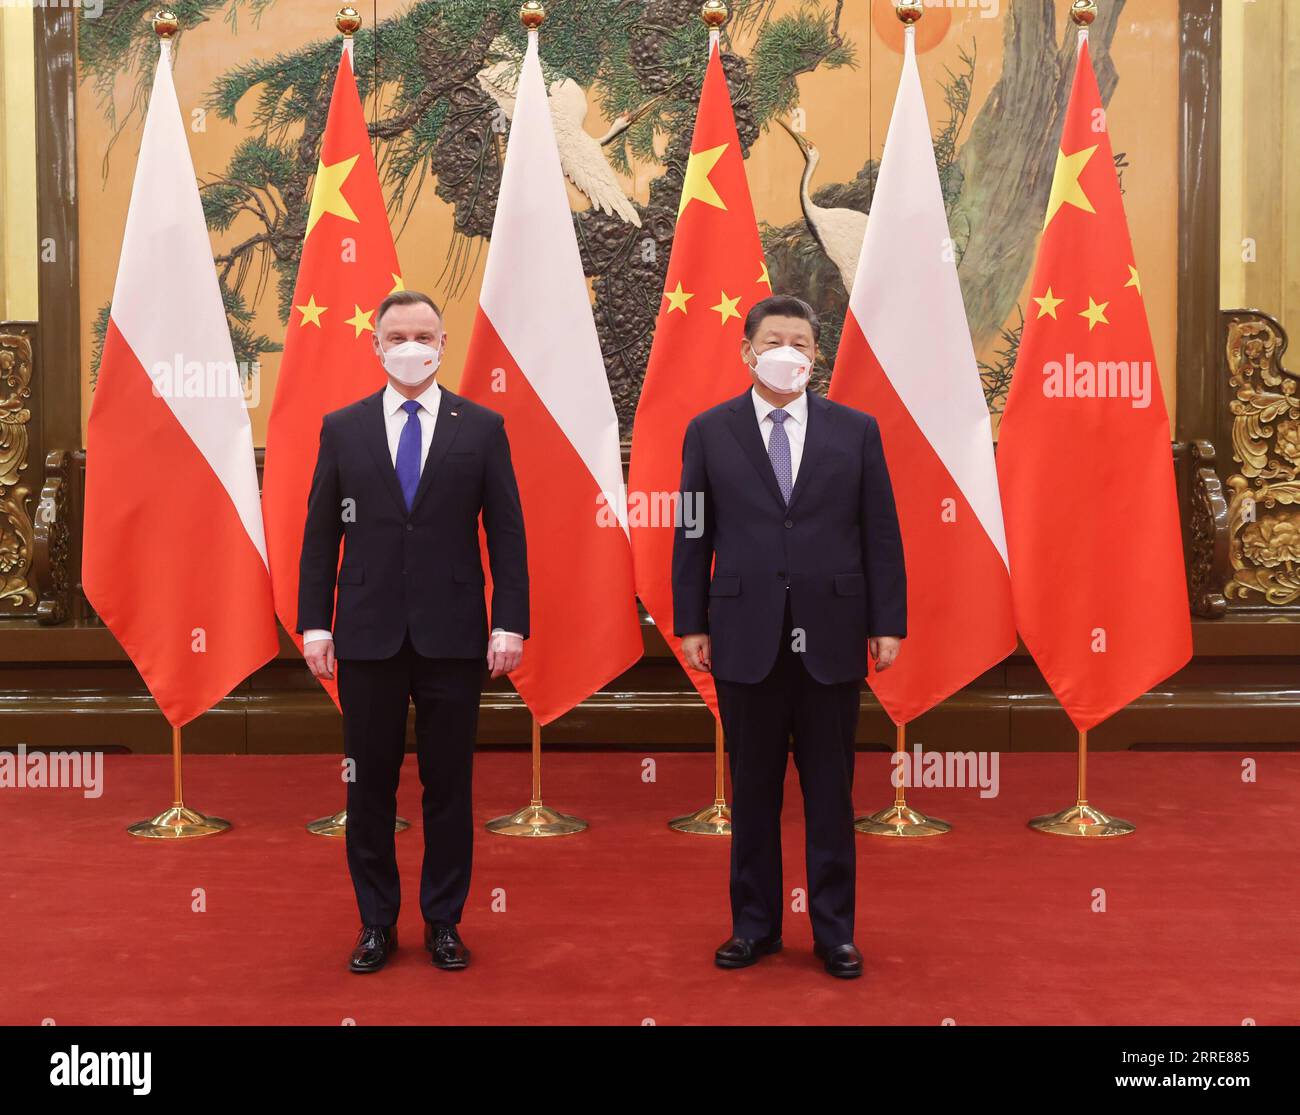 220206 -- BEIJING, Feb. 6, 2022 -- Chinese President Xi Jinping meets with Polish President Andrzej Duda, who came to China for the opening ceremony of the Beijing 2022 Olympic Winter Games, at the Great Hall of the People in Beijing, capital of China, Feb. 6, 2022.  CHINA-BEIJING-XI JINPING-POLISH PRESIDENT-MEETING CN LiuxWeibing PUBLICATIONxNOTxINxCHN Stock Photo